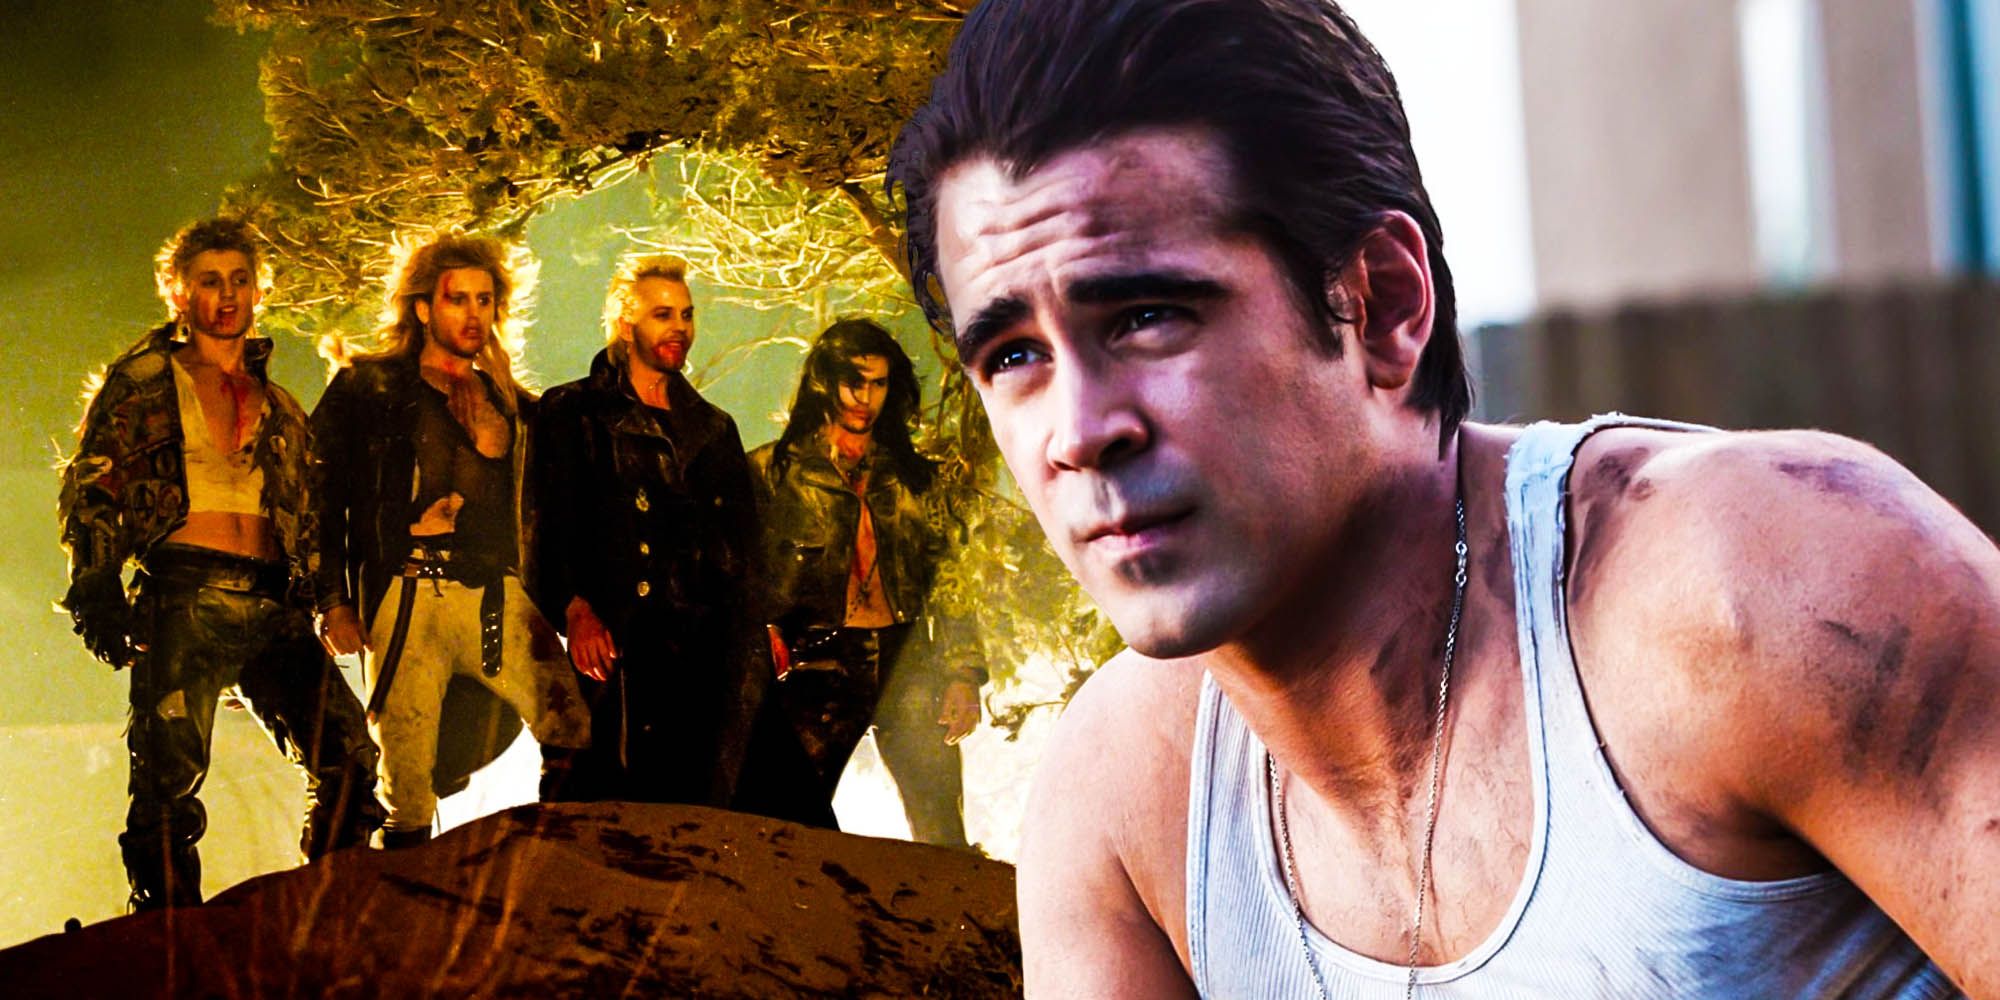 The lost boys can learn from Fright night Remake